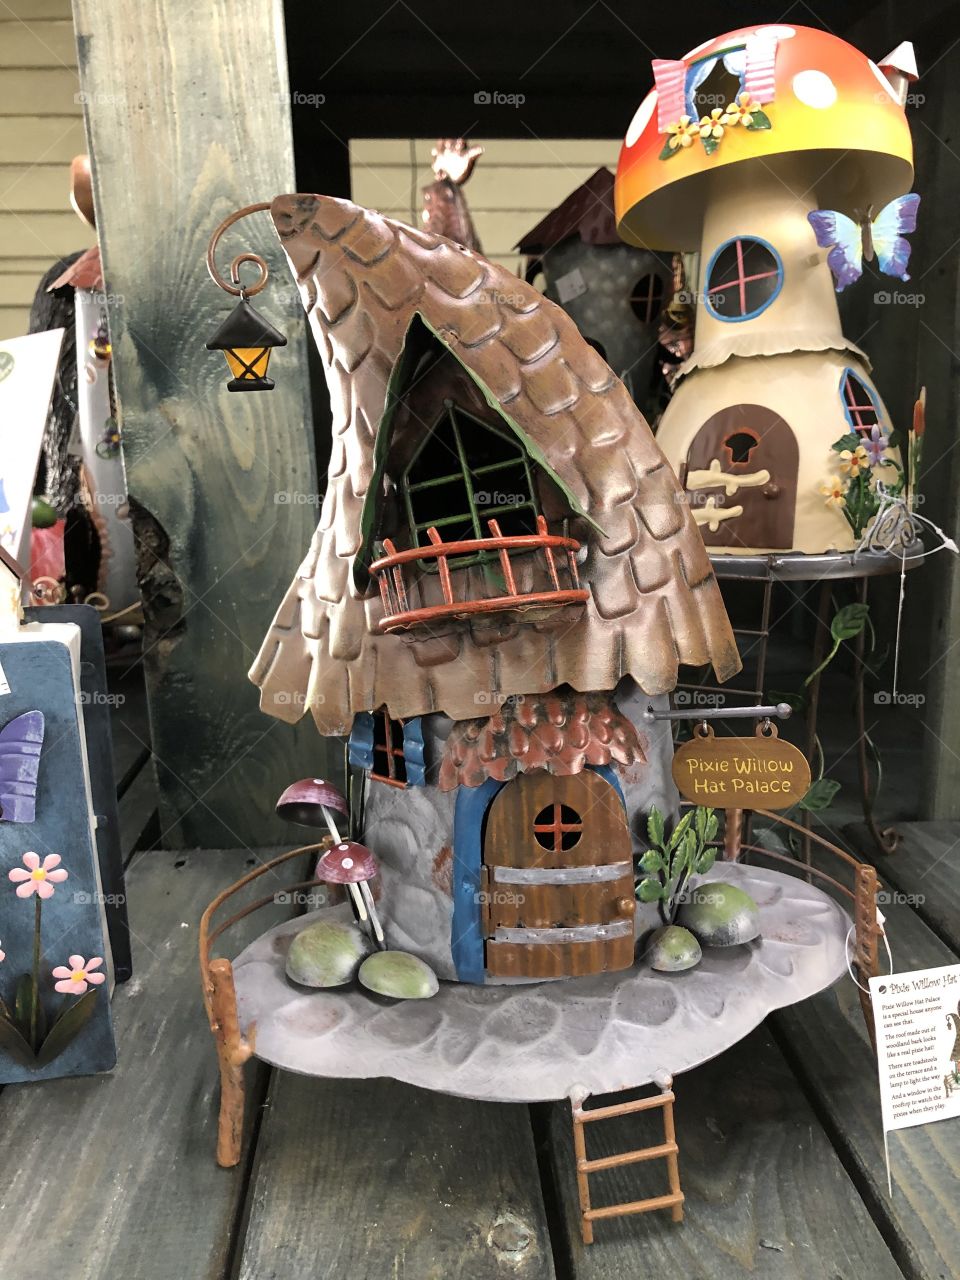 Pixie willow hat place